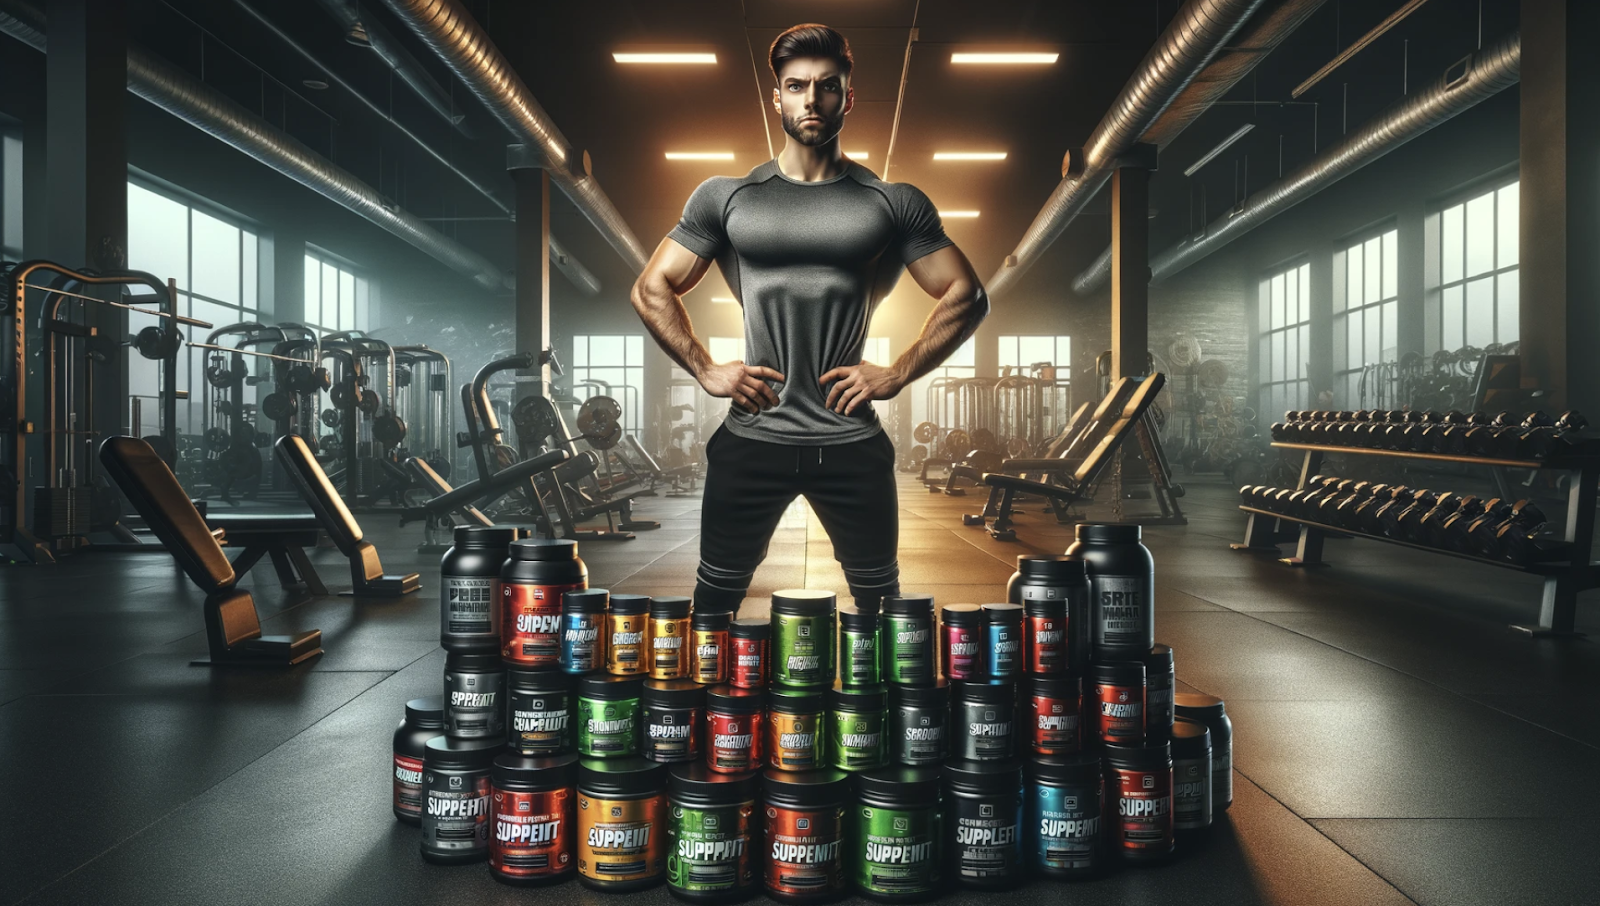 Among the myriad of options available, two stimulants have caught my attention: DMHA and DMAA. Both have garnered a significant following in the bodybuilding and weight loss communities, but which one reigns supreme?